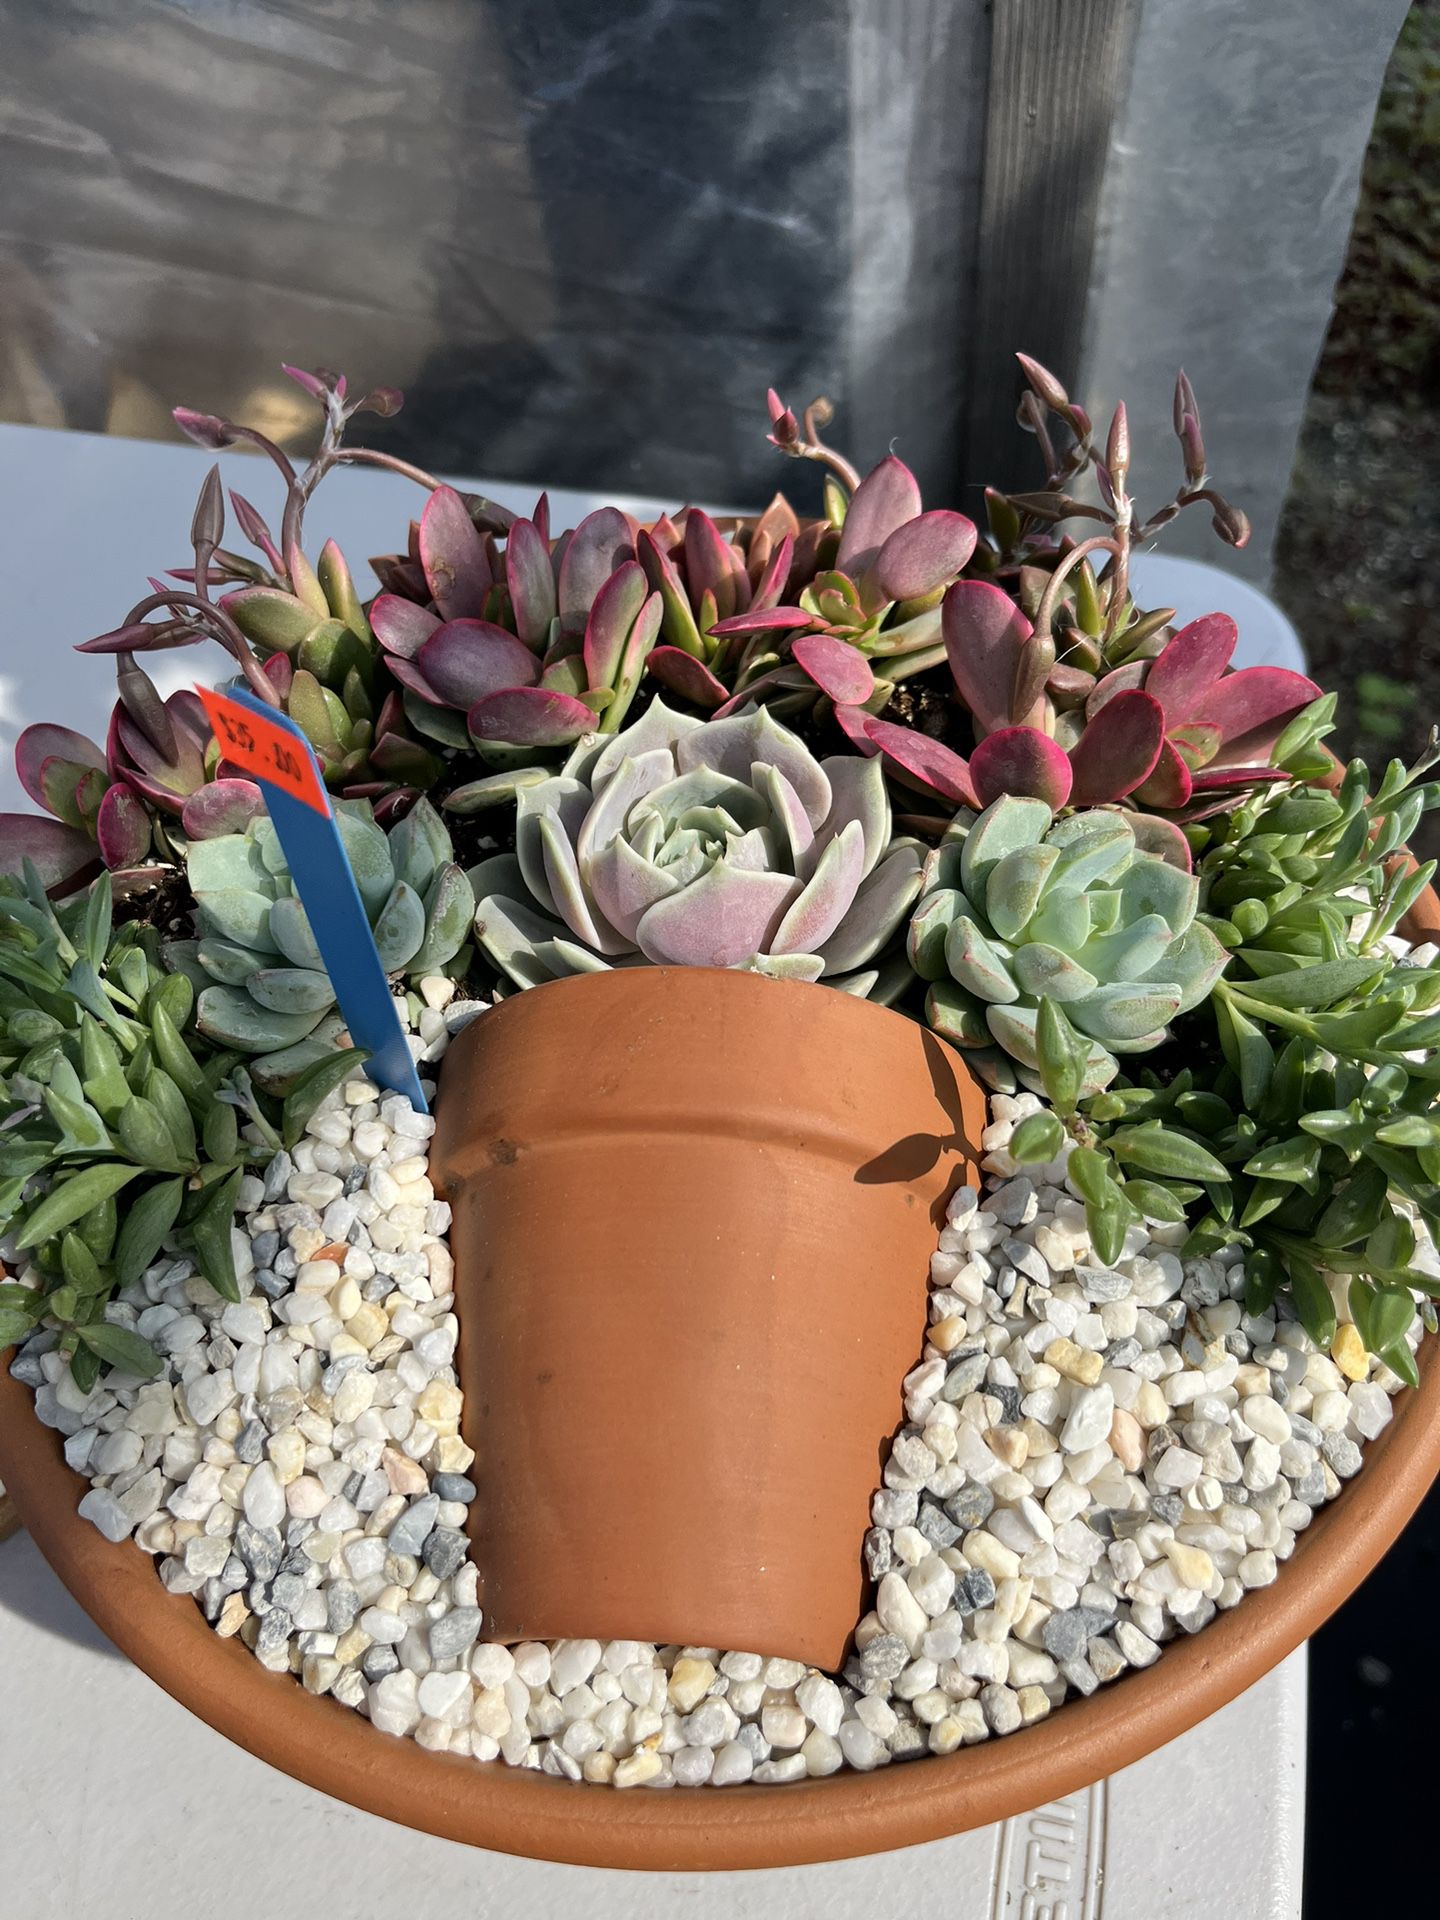 Succulent Arrangements Ready For Mothers Day From $7 And Up